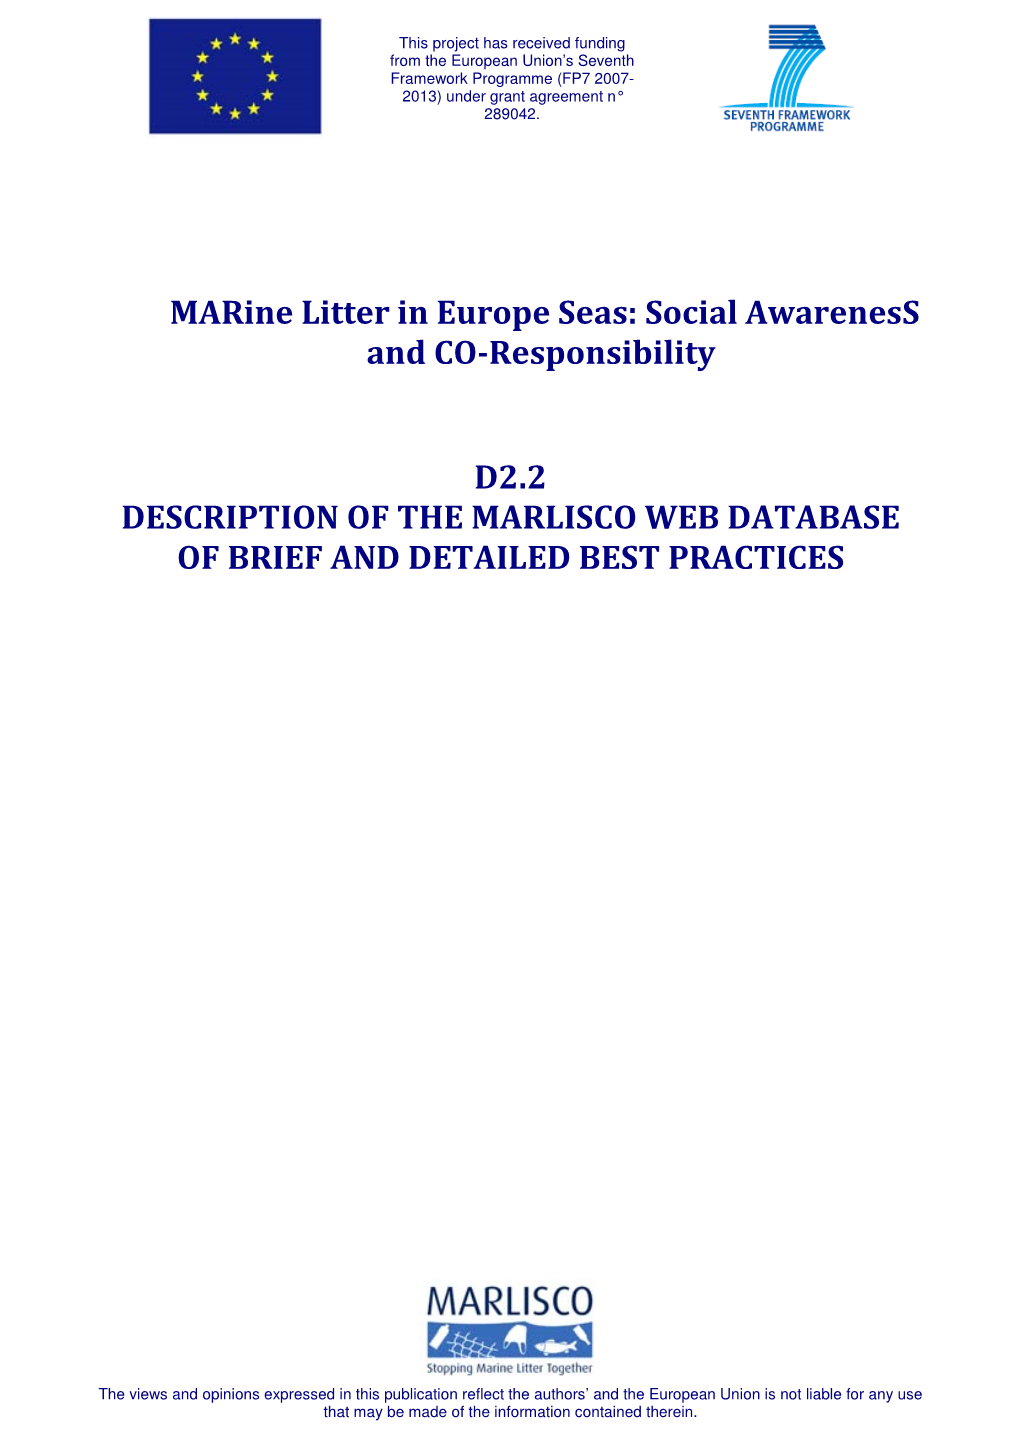 Marine Litter in Europe Seas: Social Awareness and CO-Responsibility